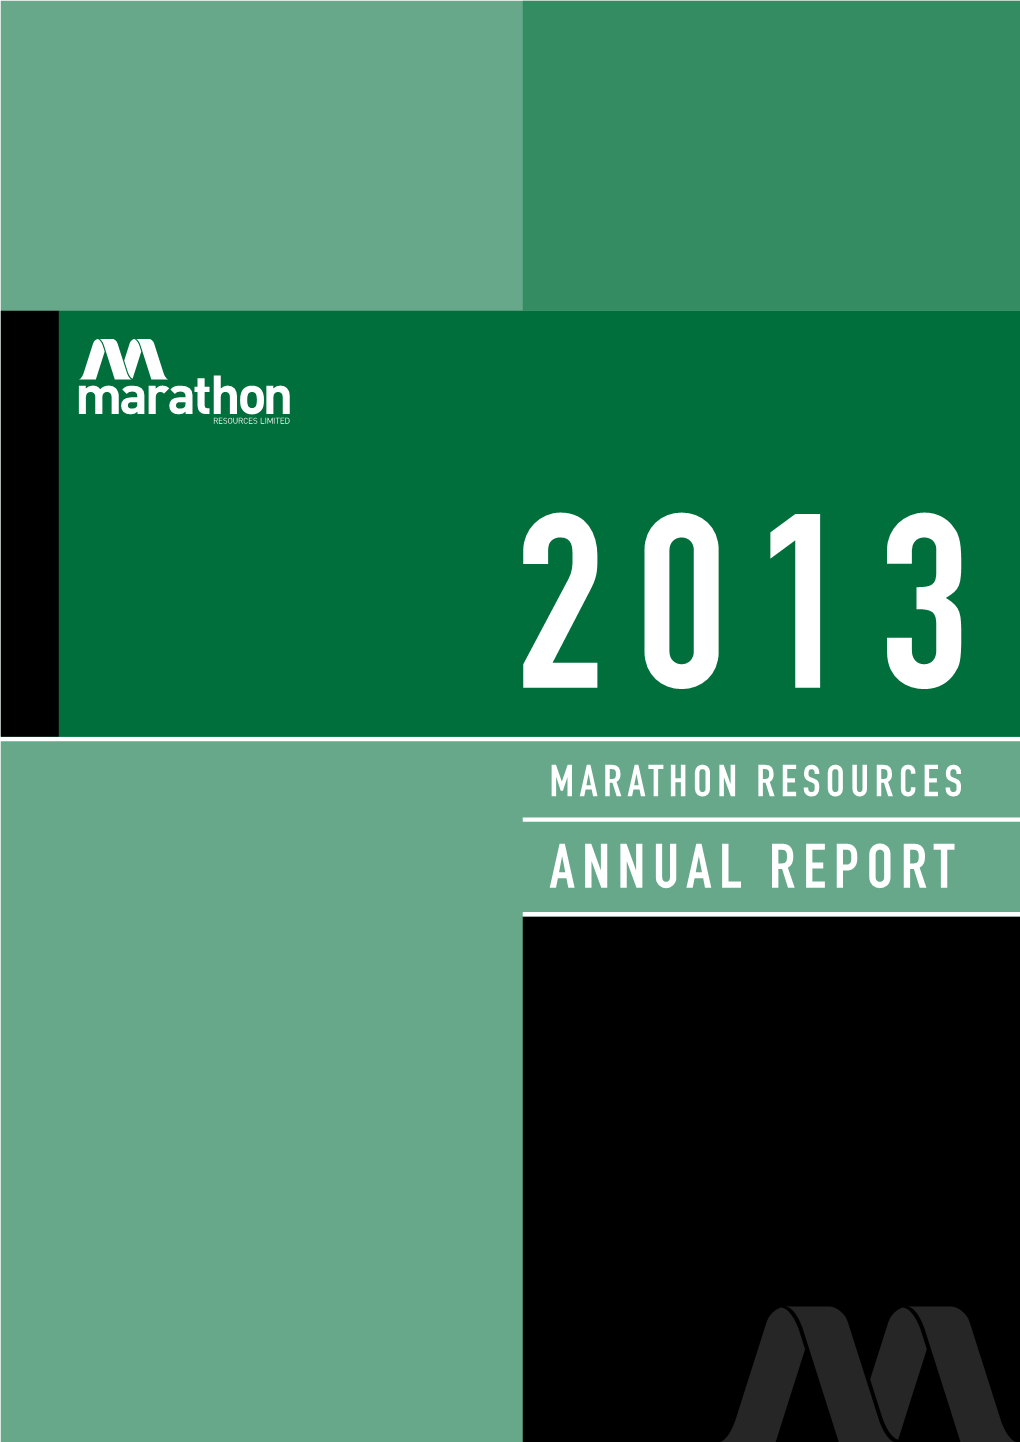 ANNUAL REPORT Marathon Resources Limited ACN 107 531 822 Annual Report 1St July 2012 to 30Th June 2013